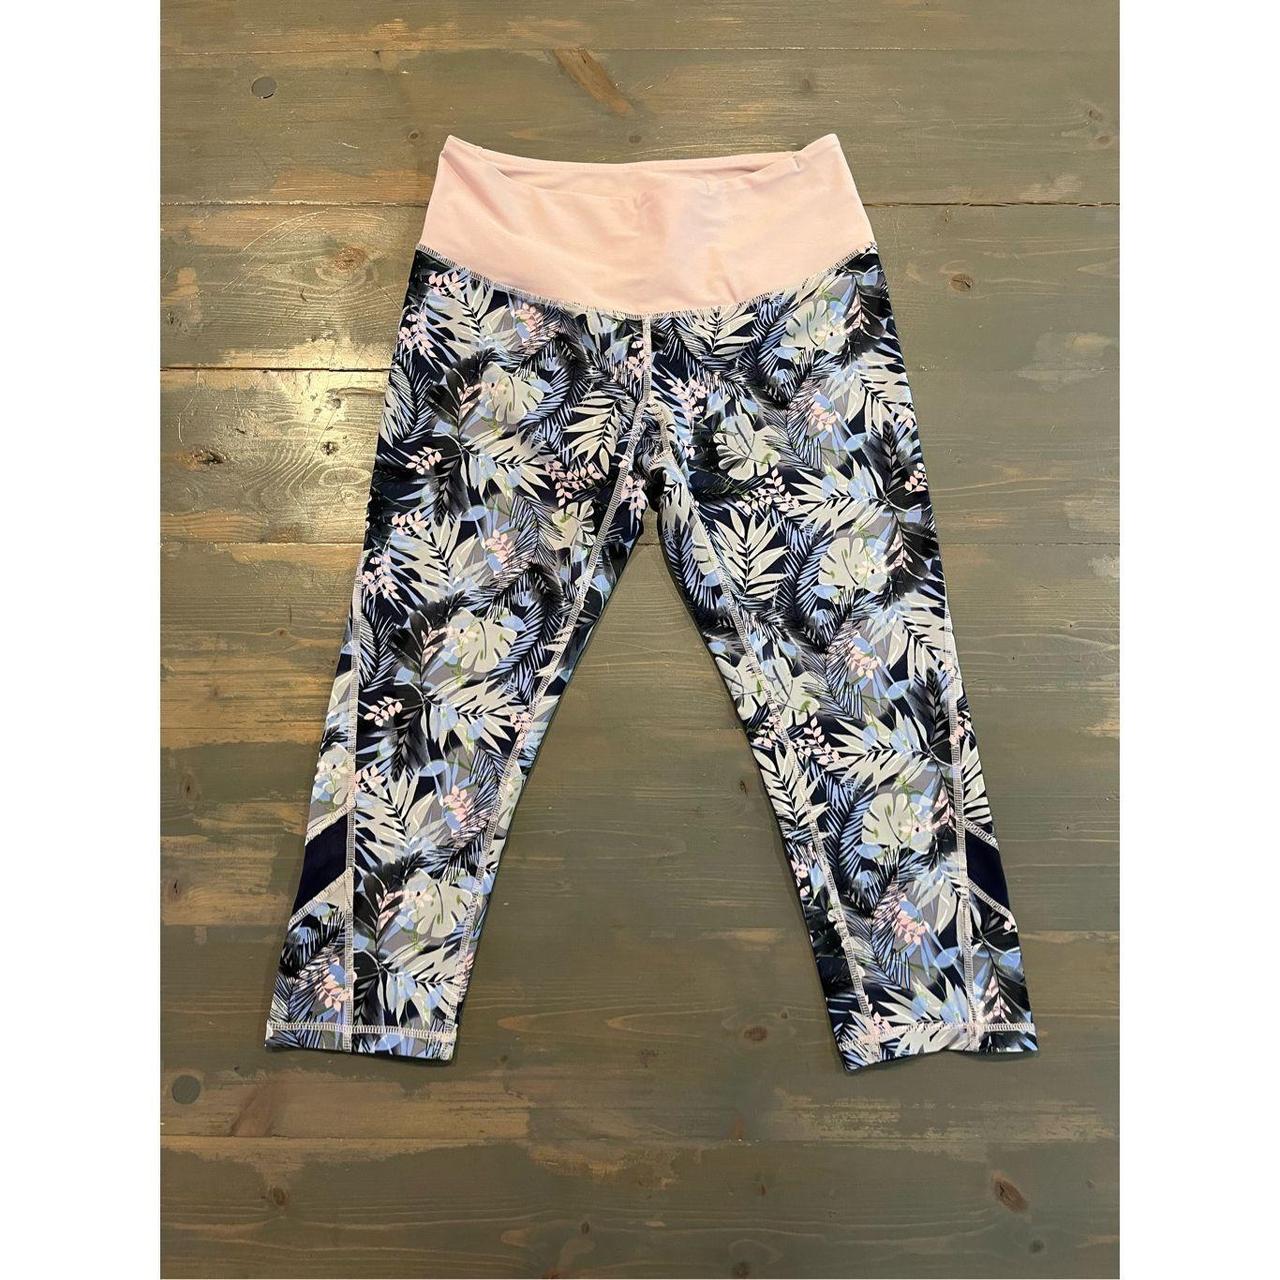 Crate Clothing Women's Pink and Blue Leggings